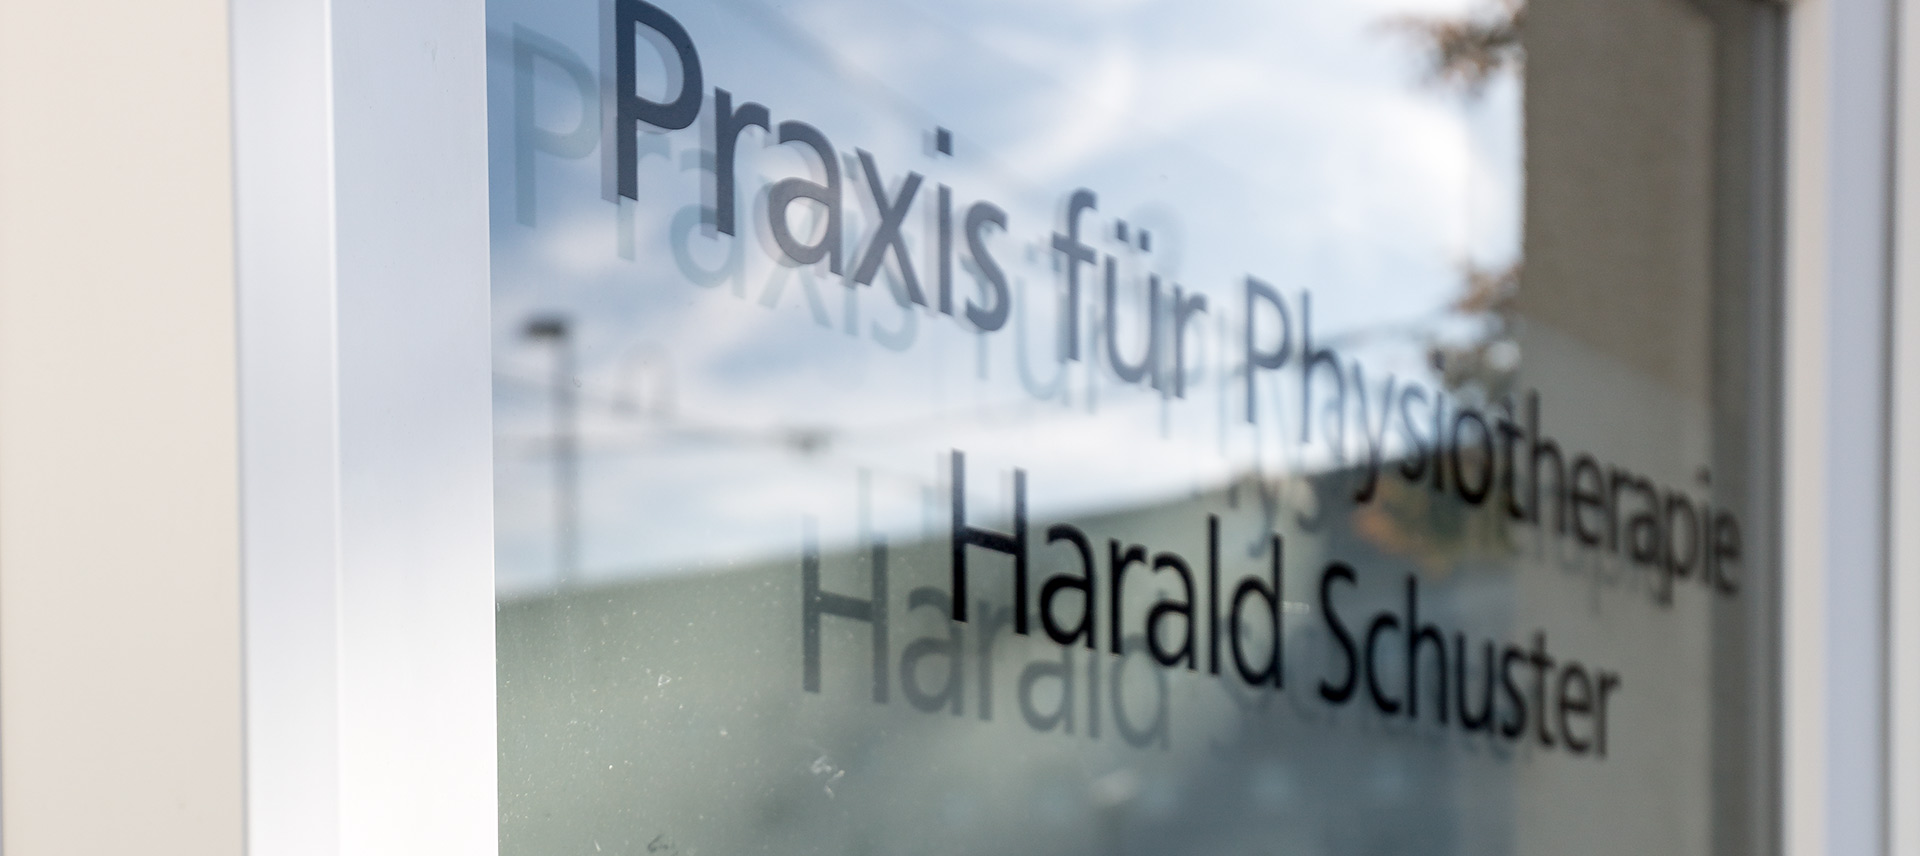 Unsere Physiotherapie-Praxis in Ludwigshafen